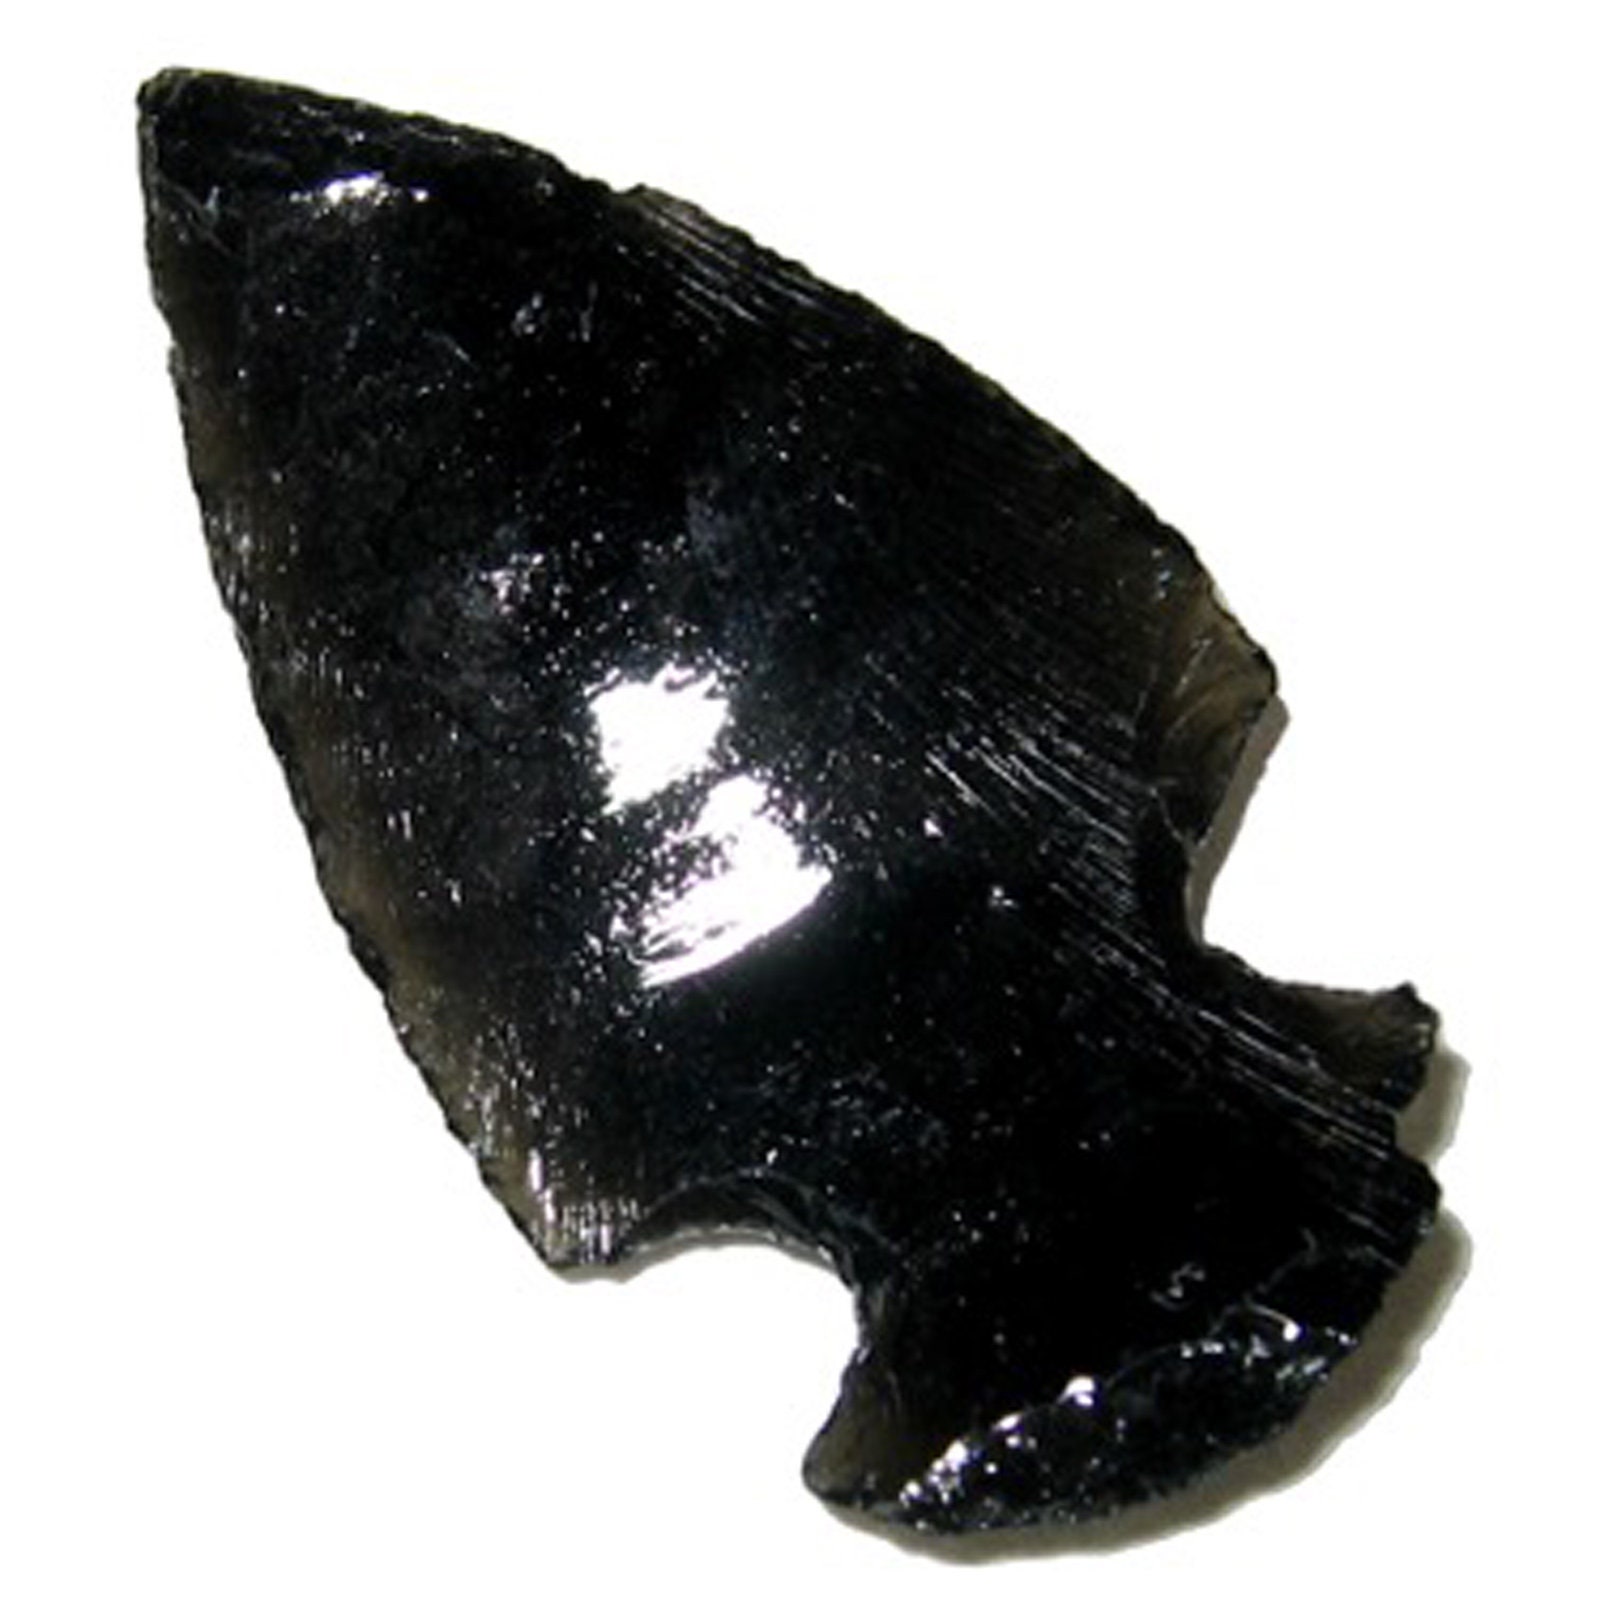 Details about   Lot of 50 Obsidian Arrowheads Hand Crafted Black Stone Arrow Heads Free USA Ship 